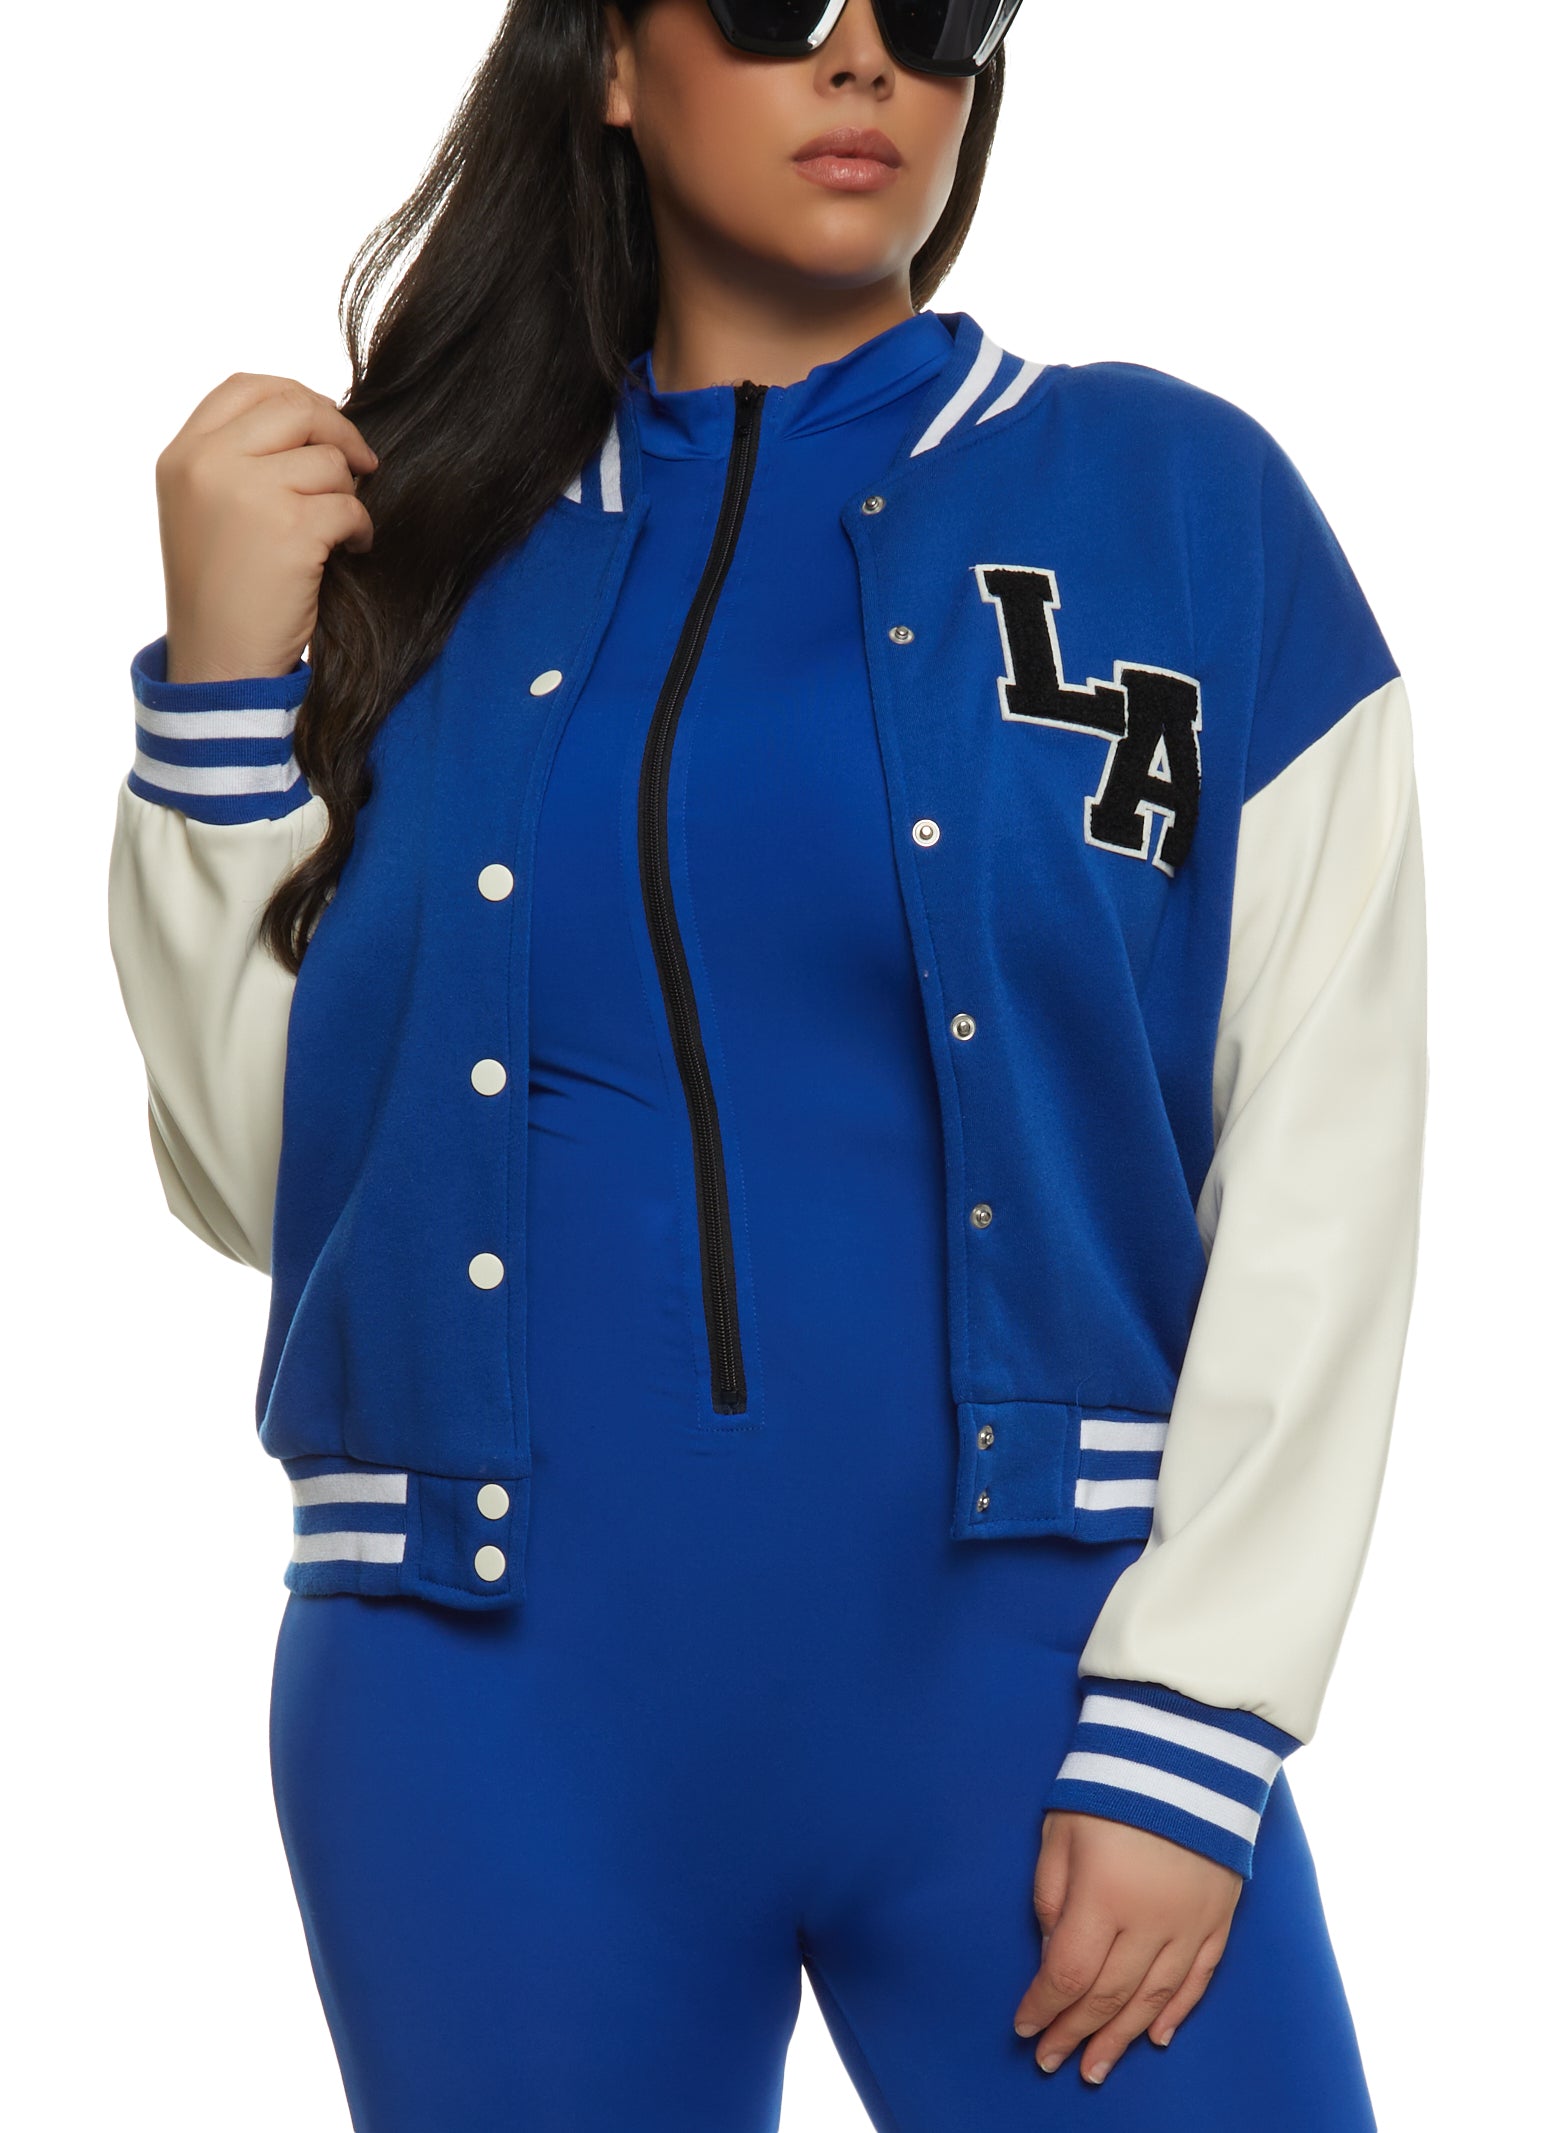 Trendy Royal body and white sleeve letterman jacket JH043